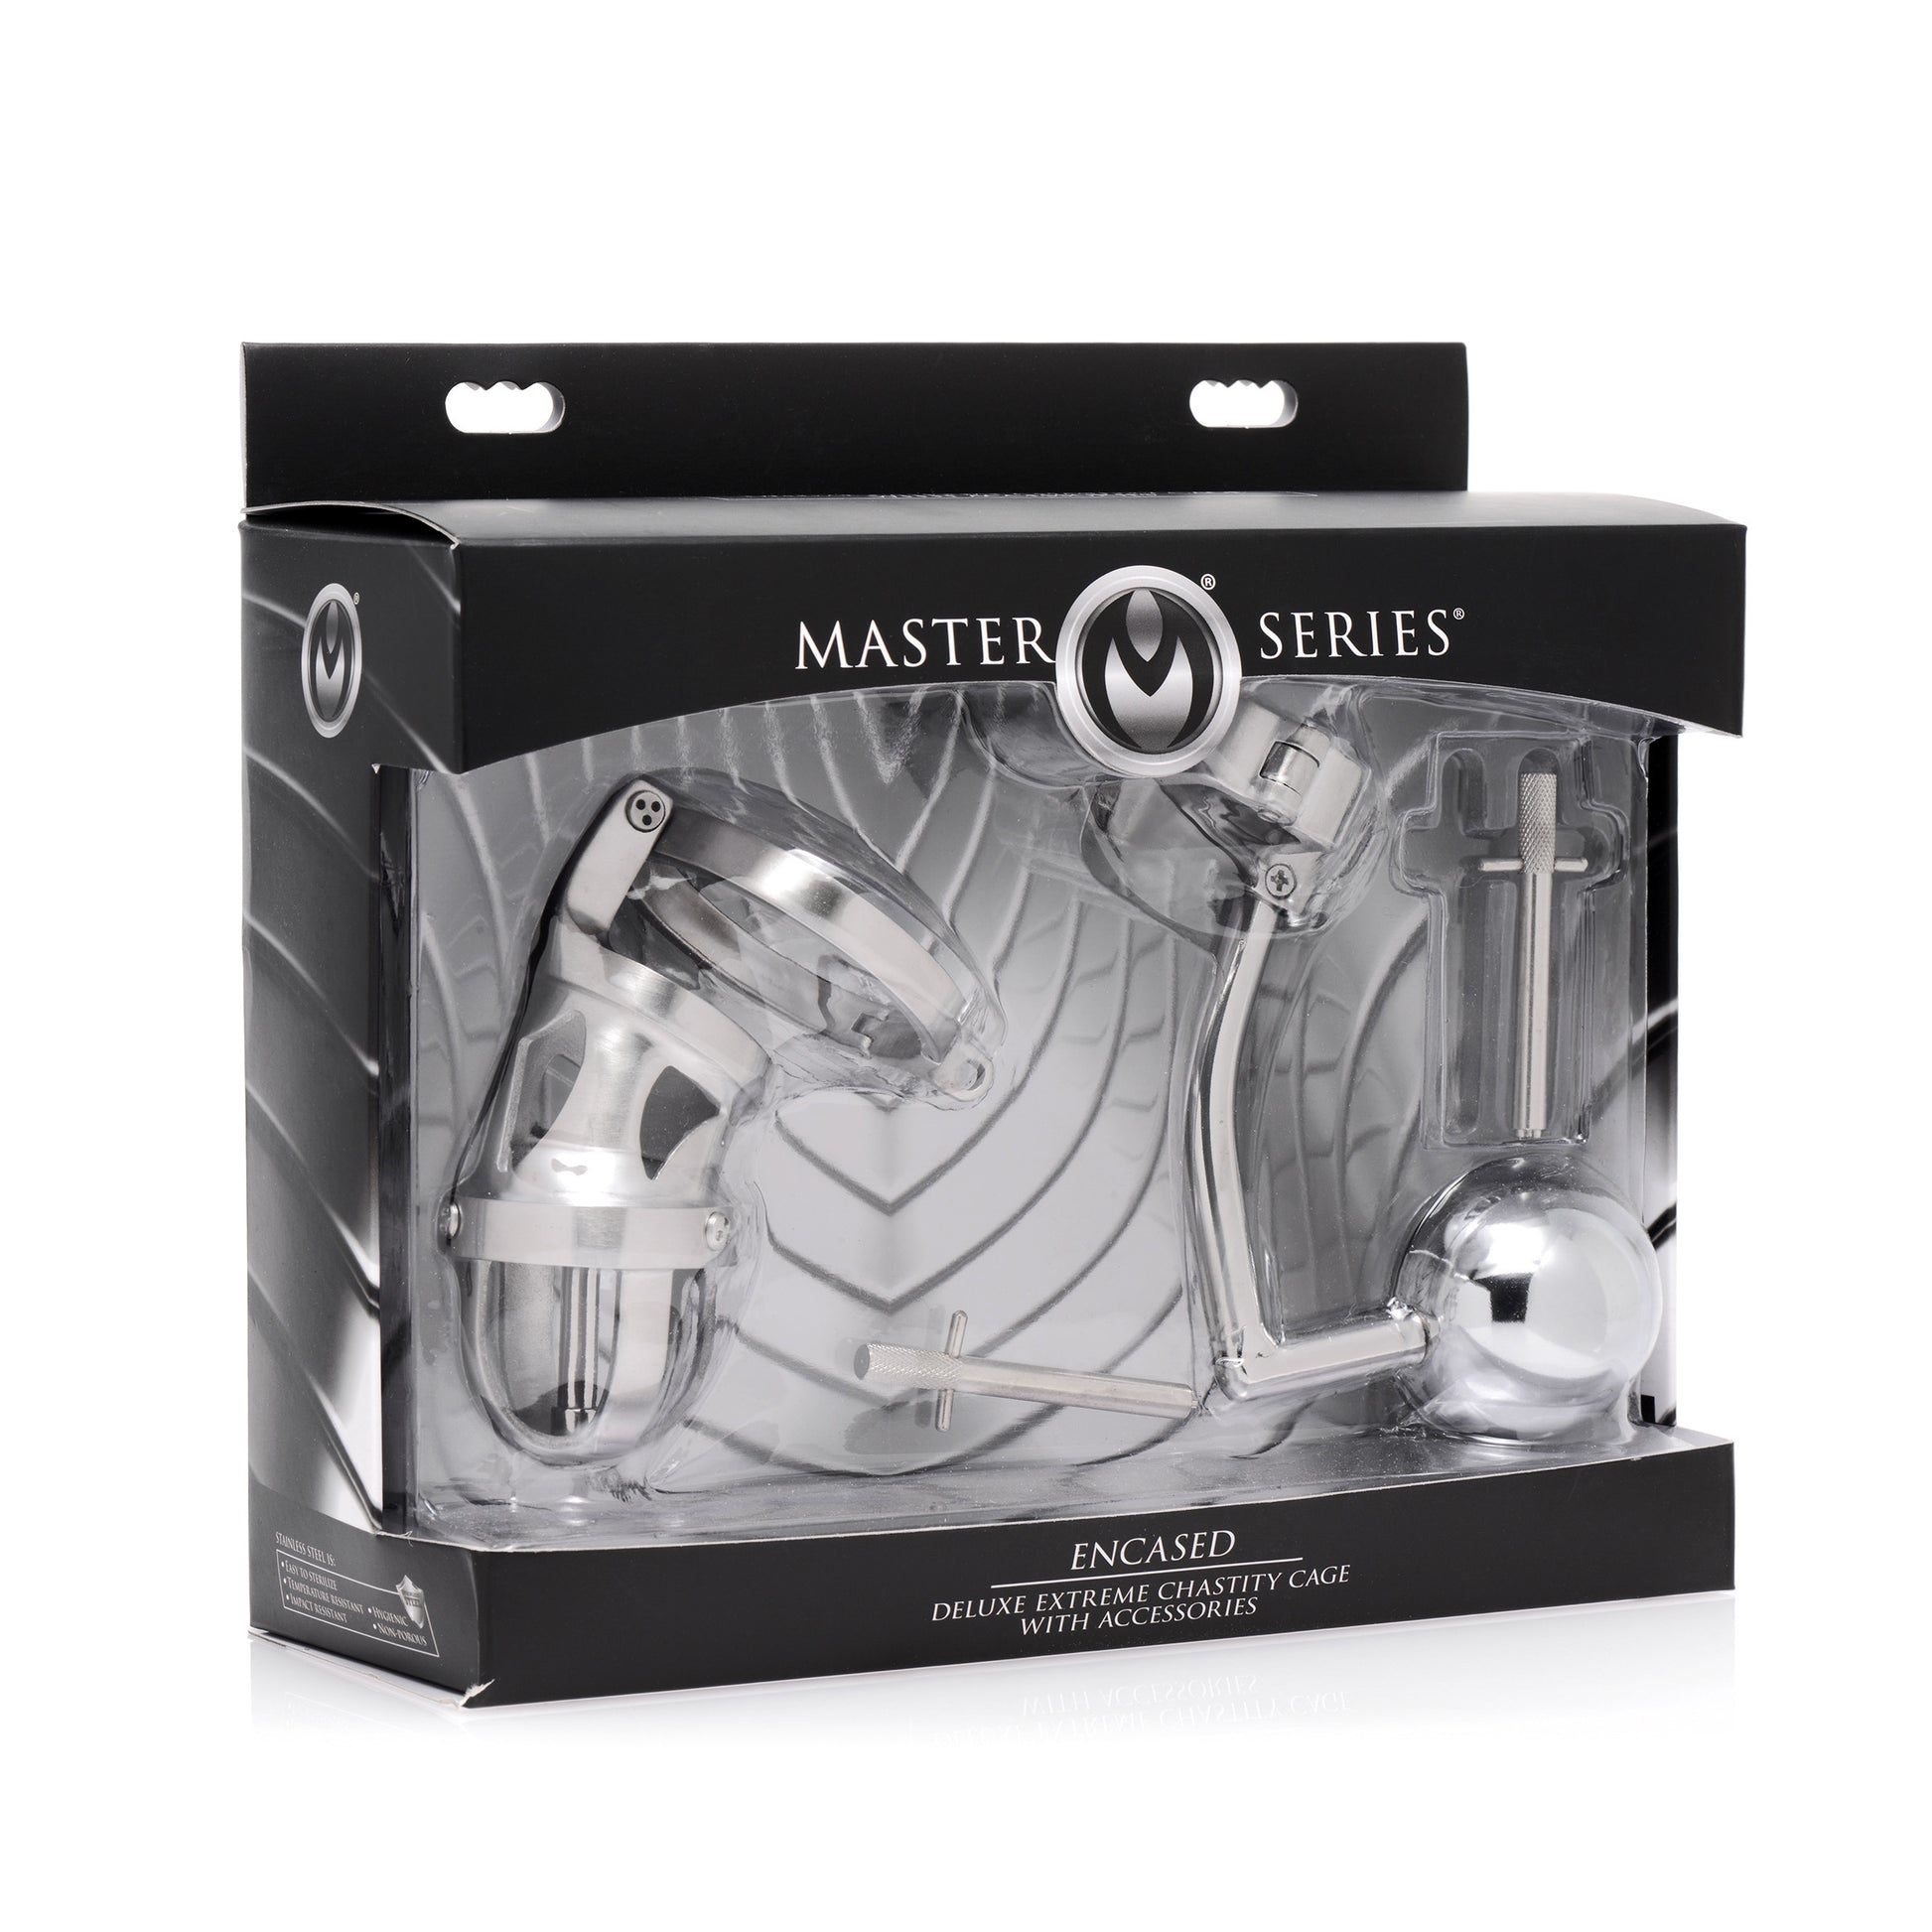 The Deluxe Extreme Chastity Cage with Accessories - UABDSM